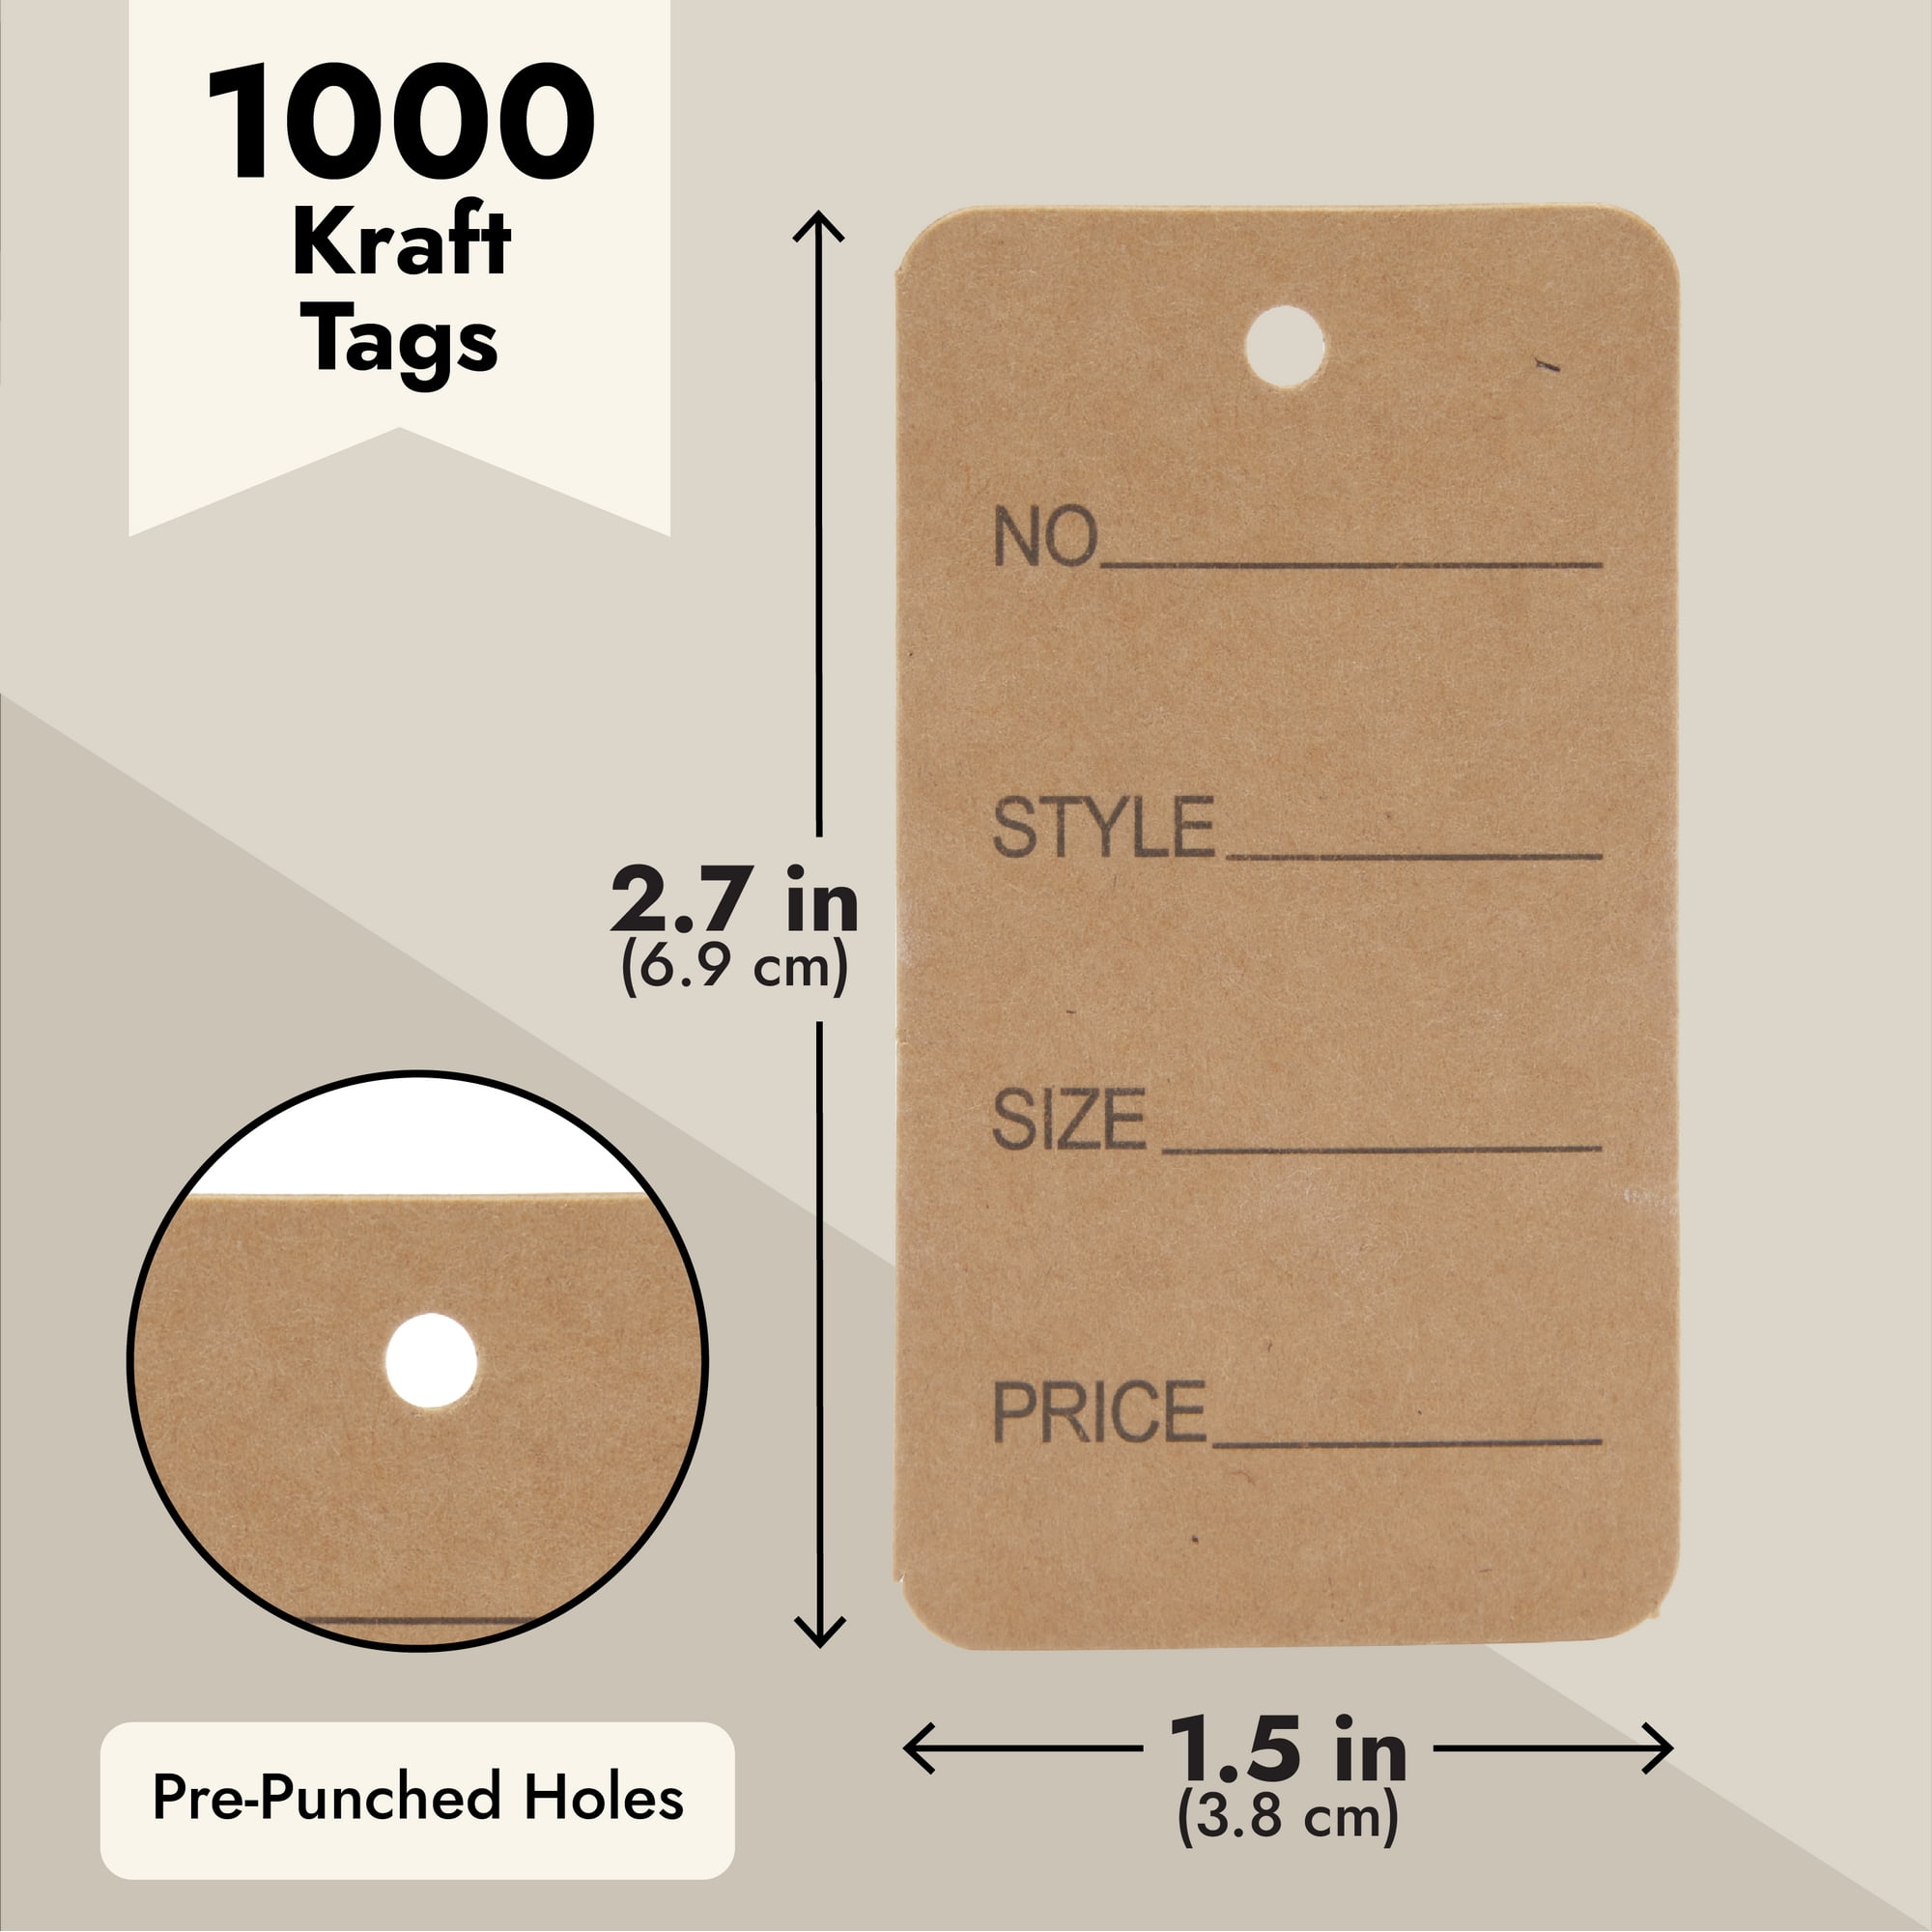 jijAcraft 1000Pcs Price Tags, Brown Clothing Tags for Retail, Small Kraft  Paper Tags for Labeling Price, Size, Number, Writable Price Tags for